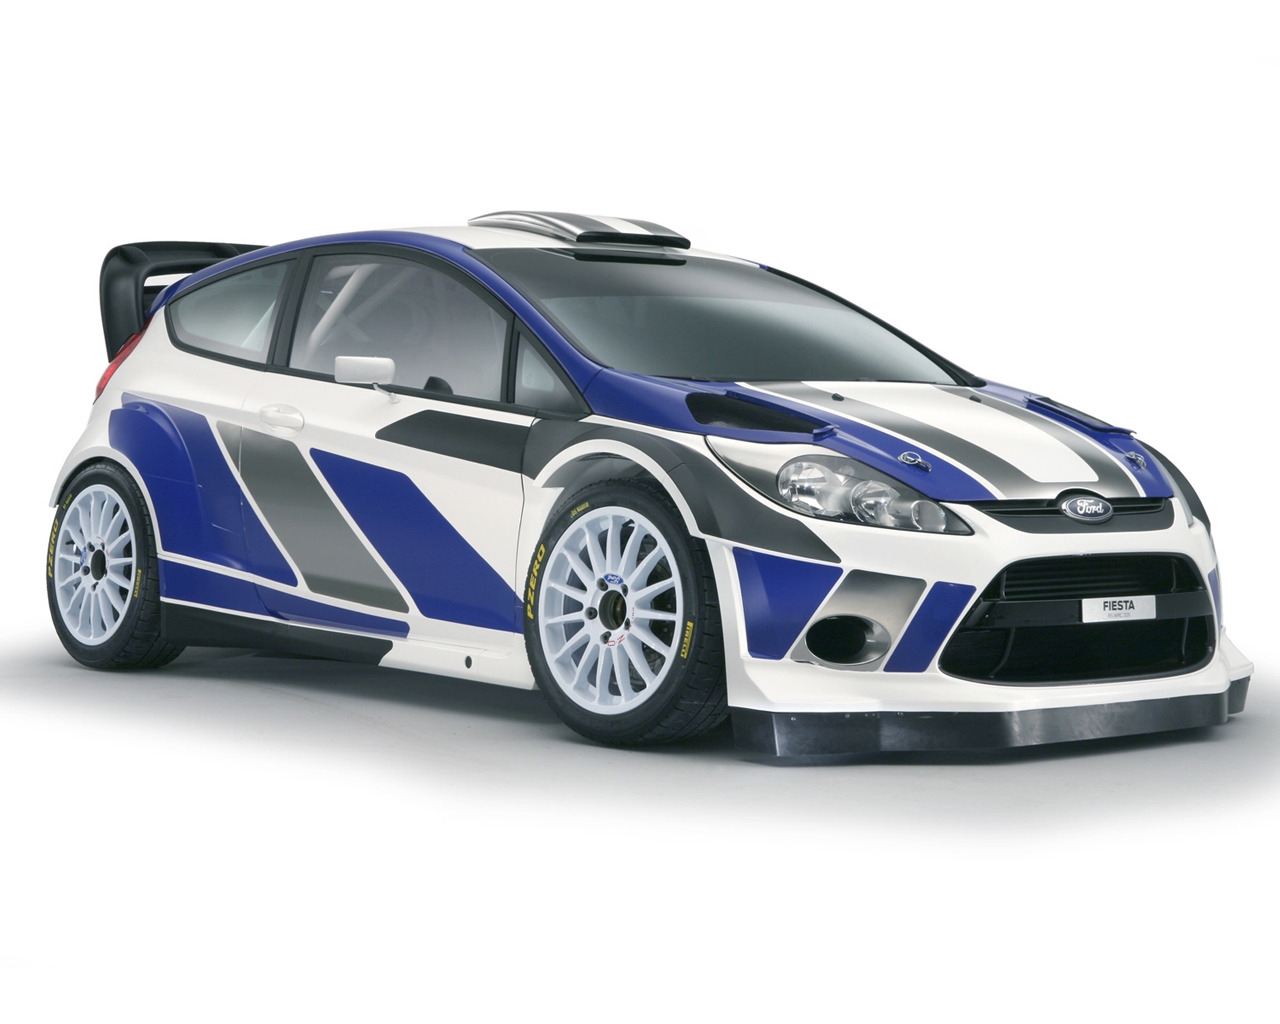 2011 Ford Fiesta RS World Rally Car for 1280 x 1024 resolution